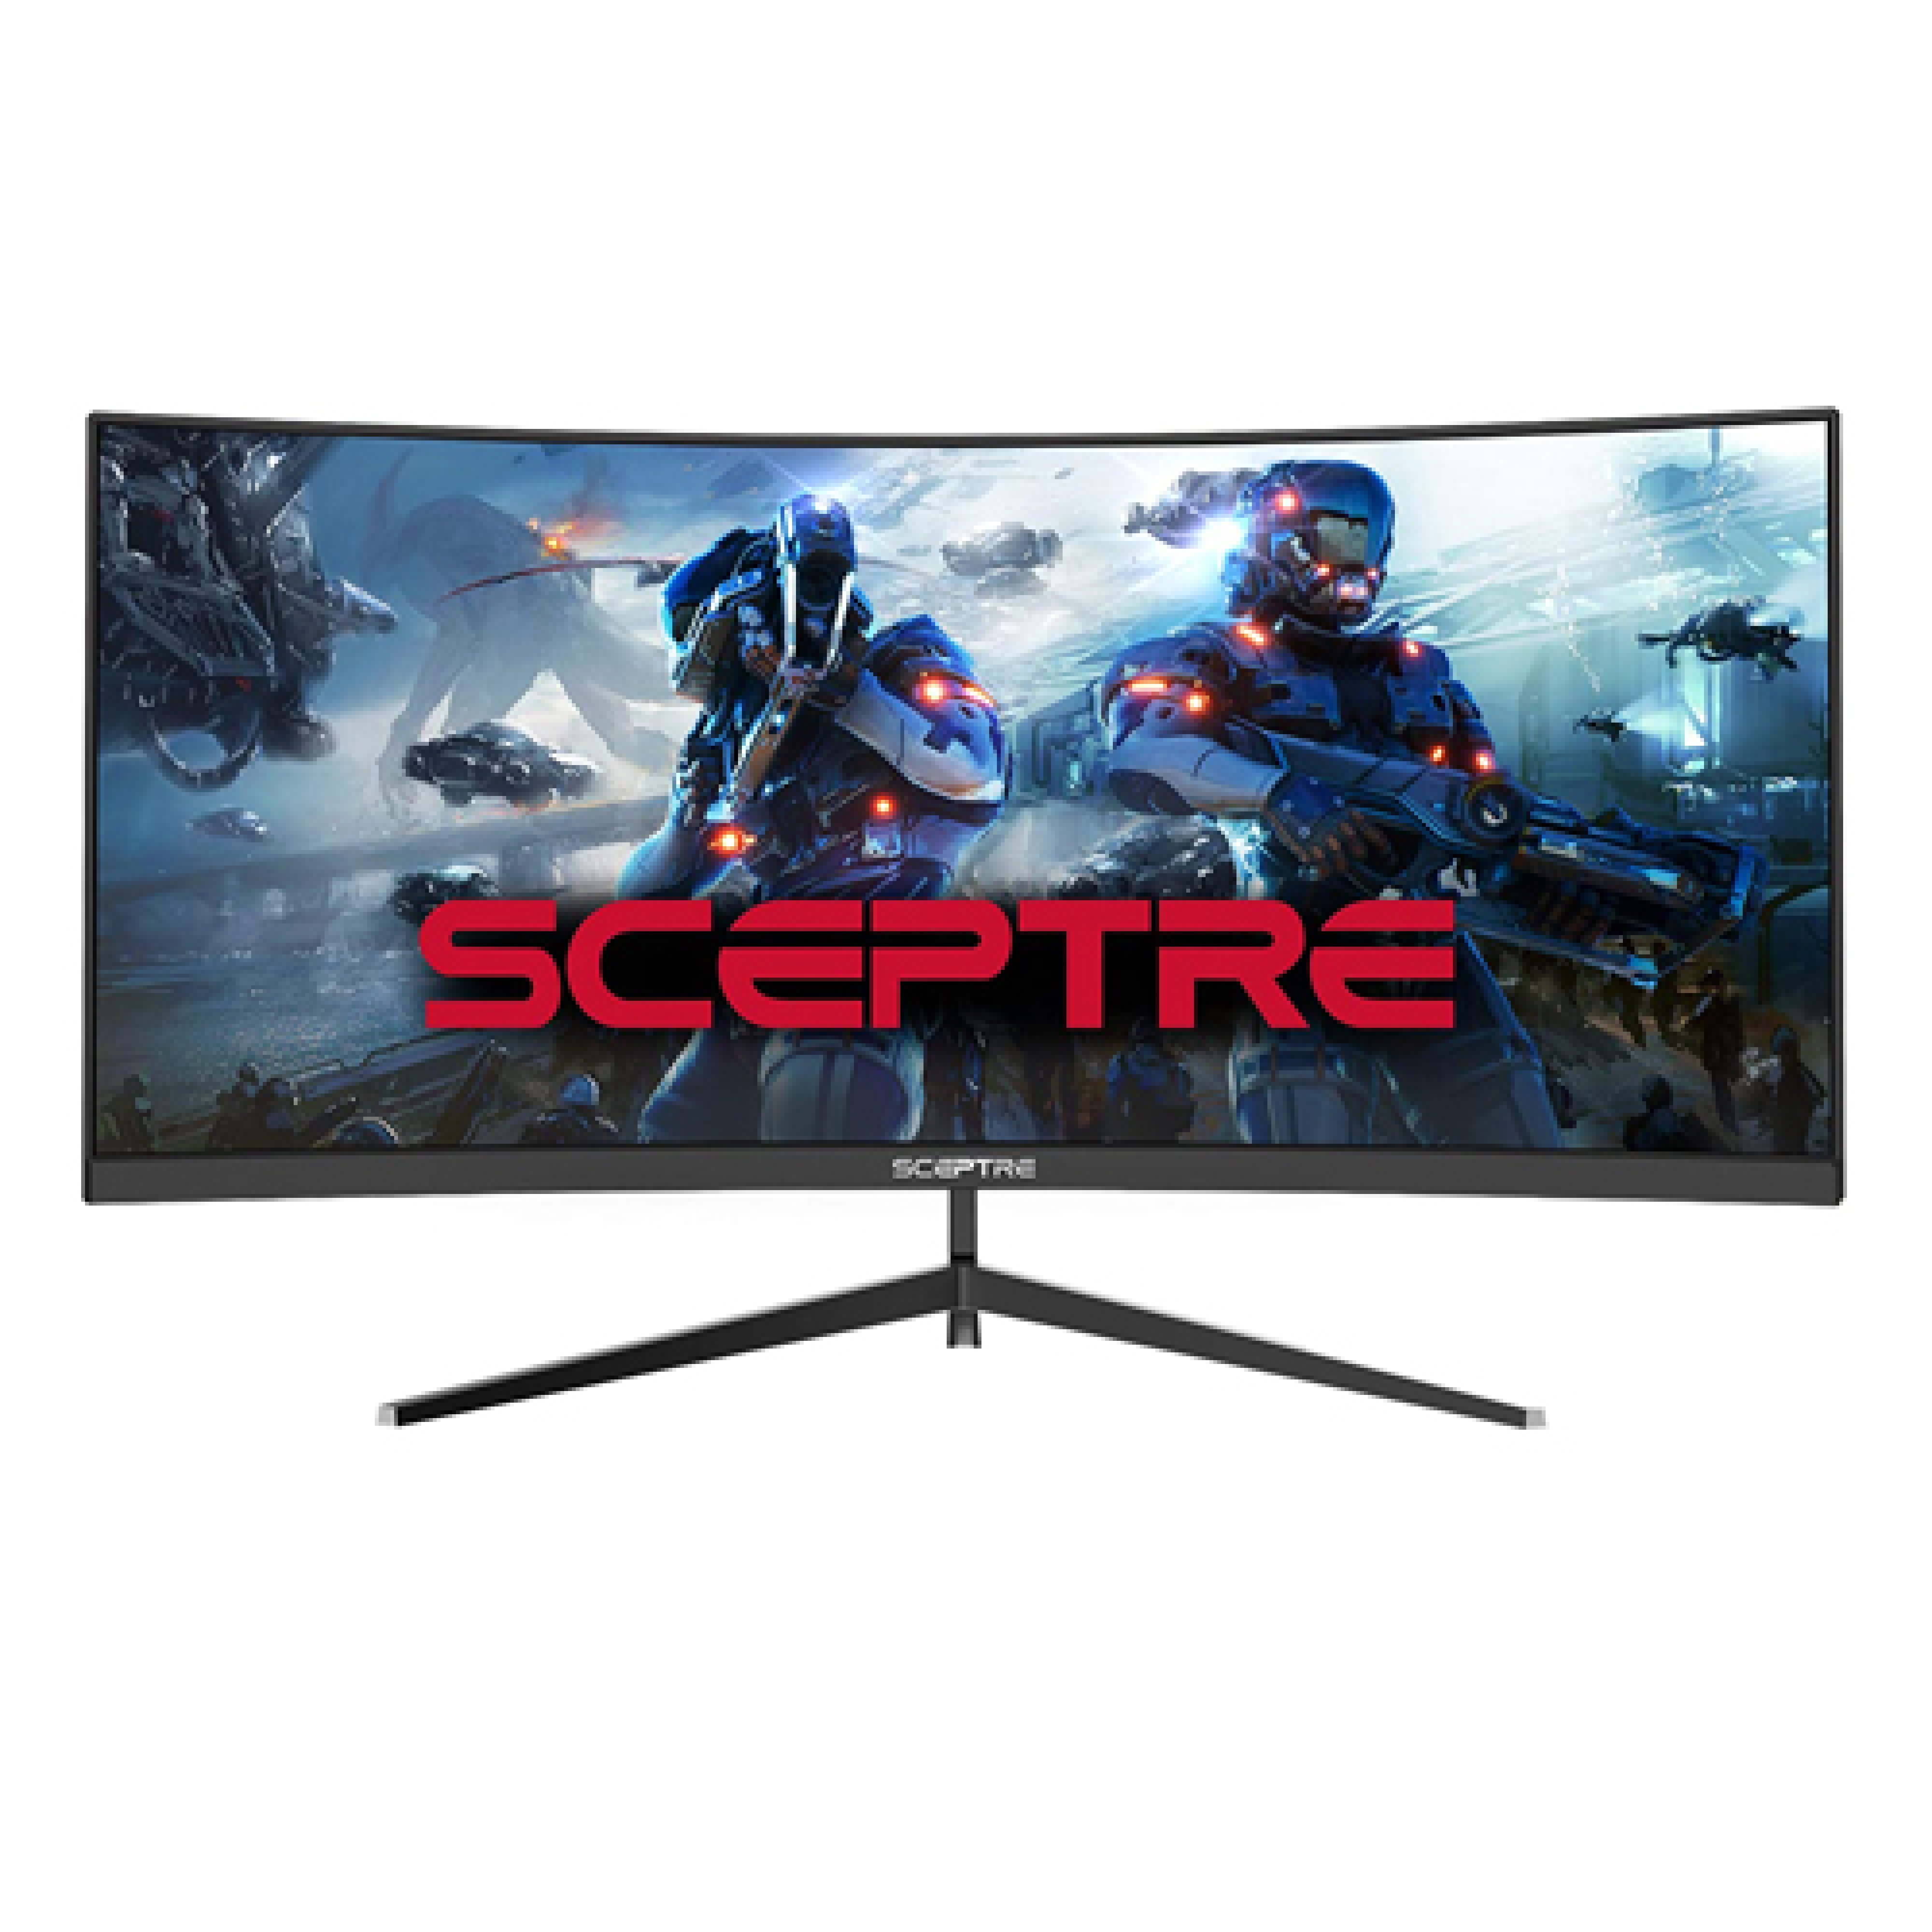 10 Best Monitors Under 300 September 2021 Buying Guide